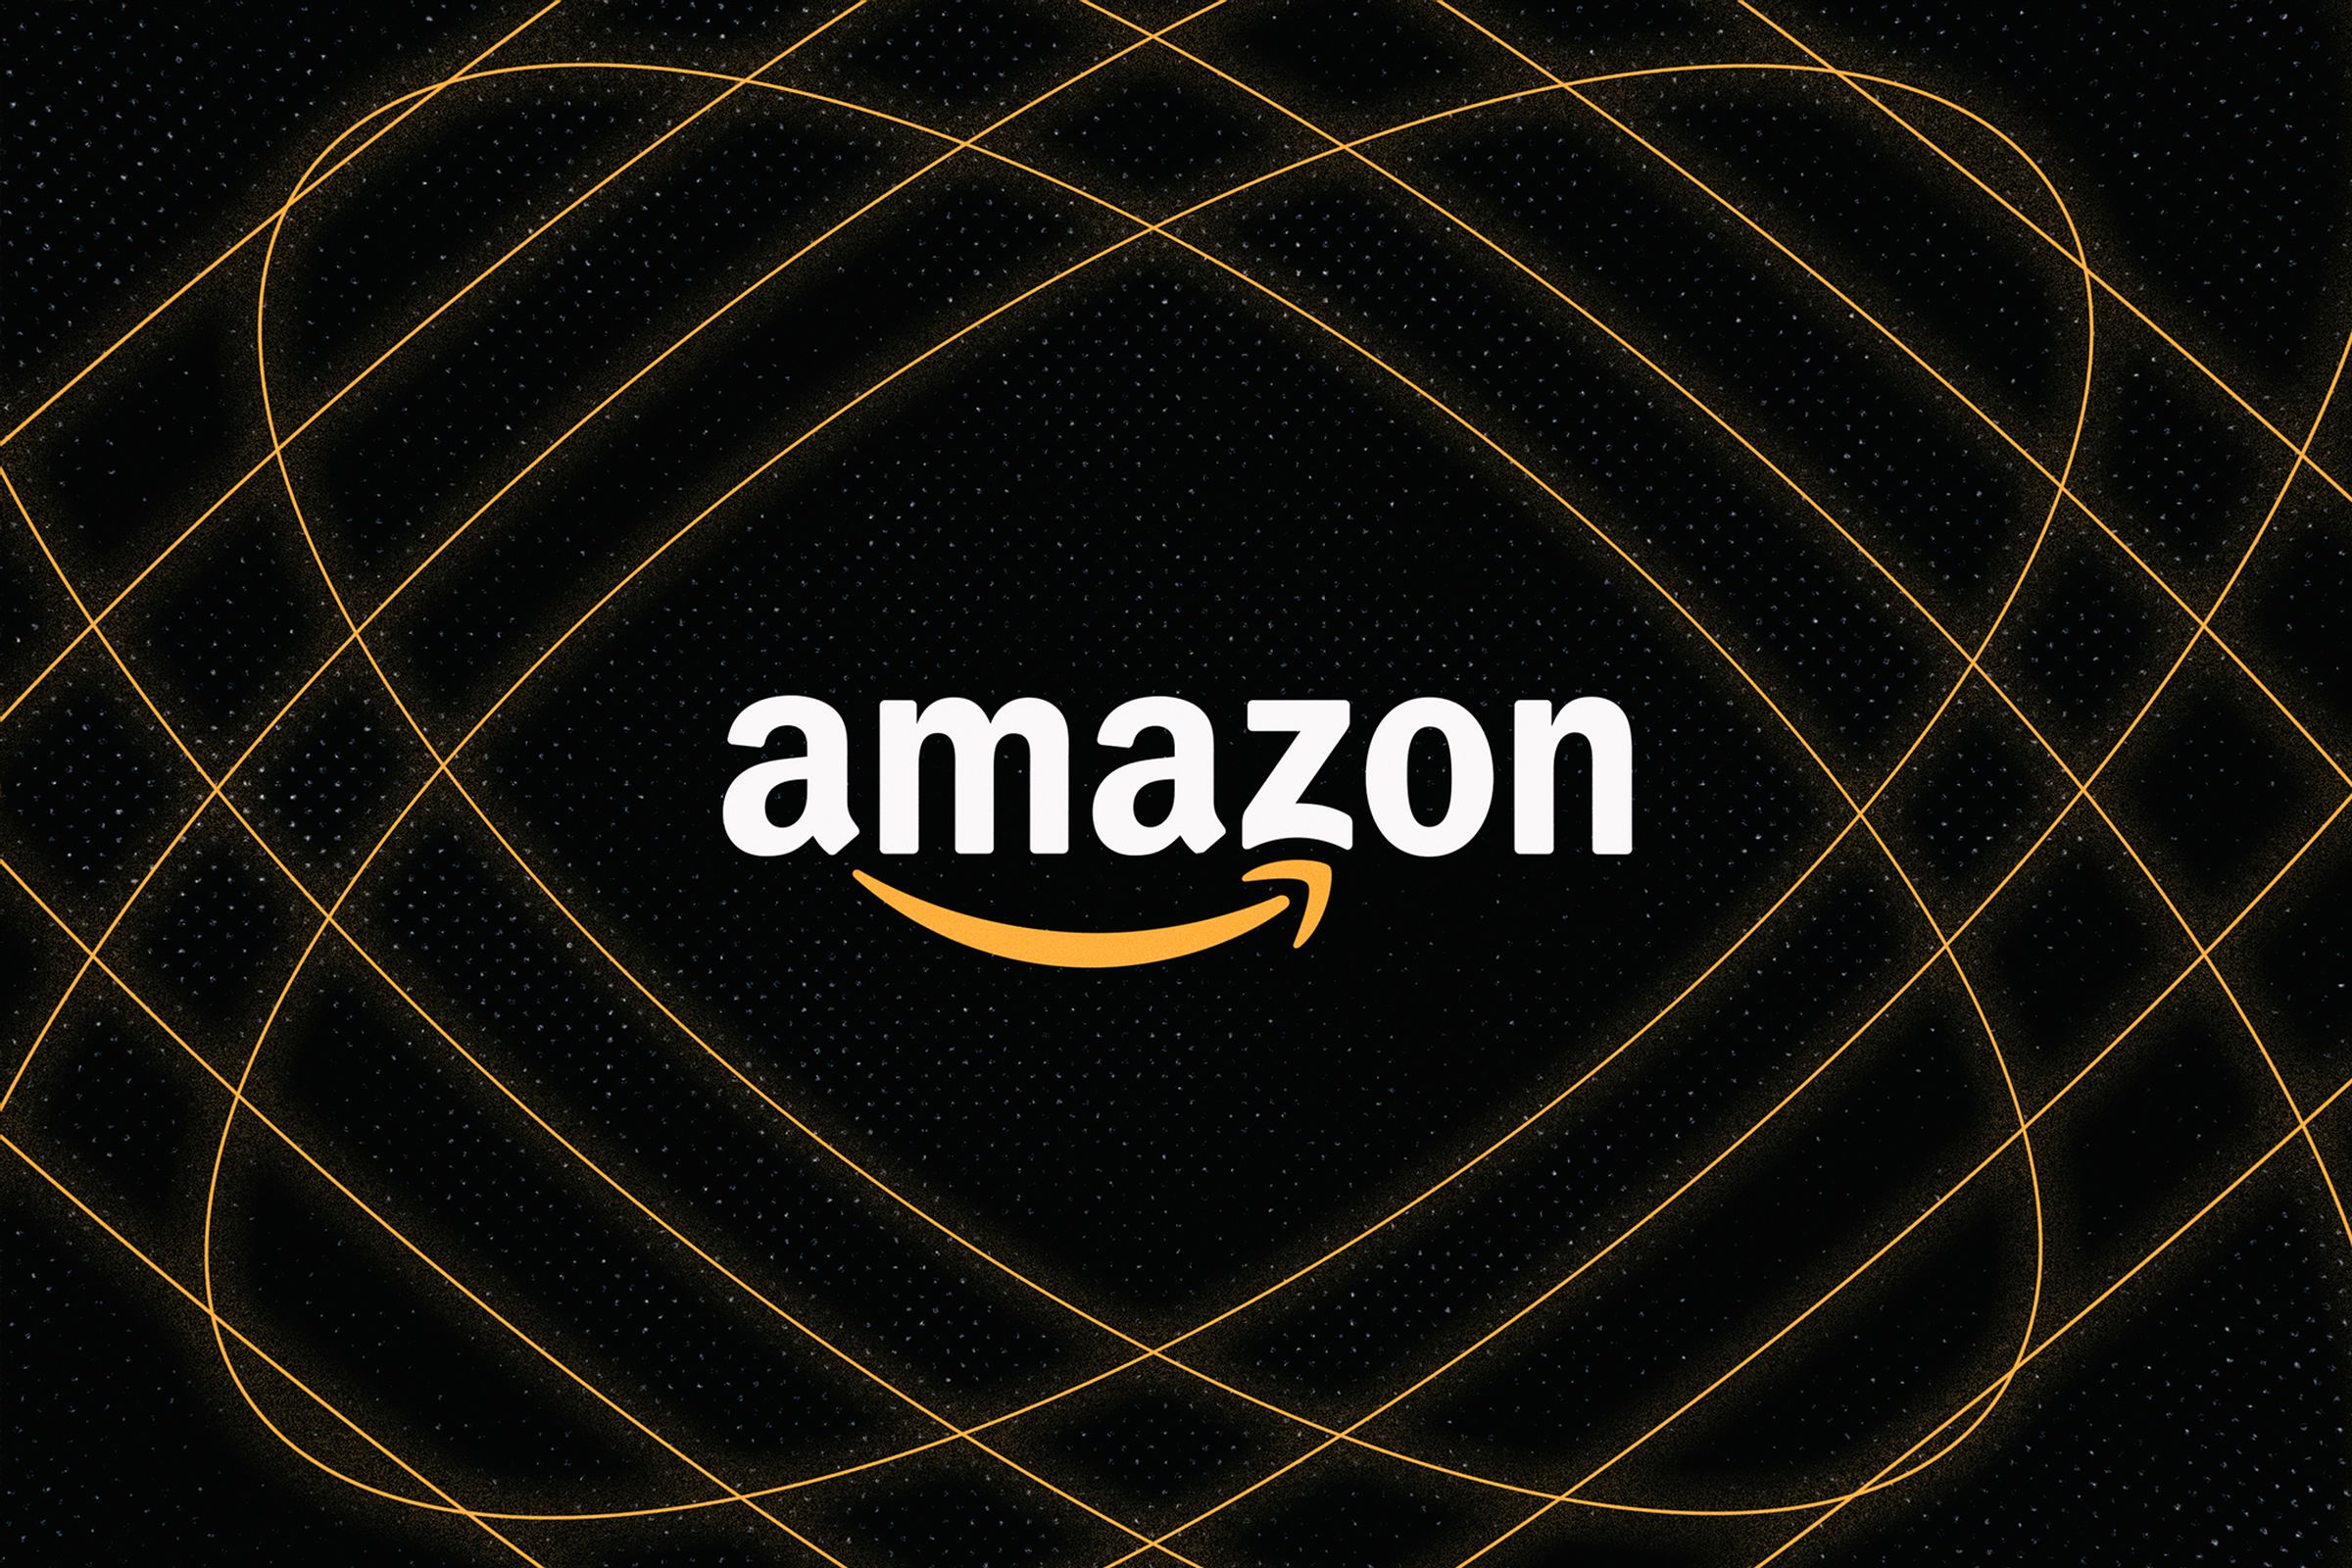 The Amazon logo over a black background with orange lines